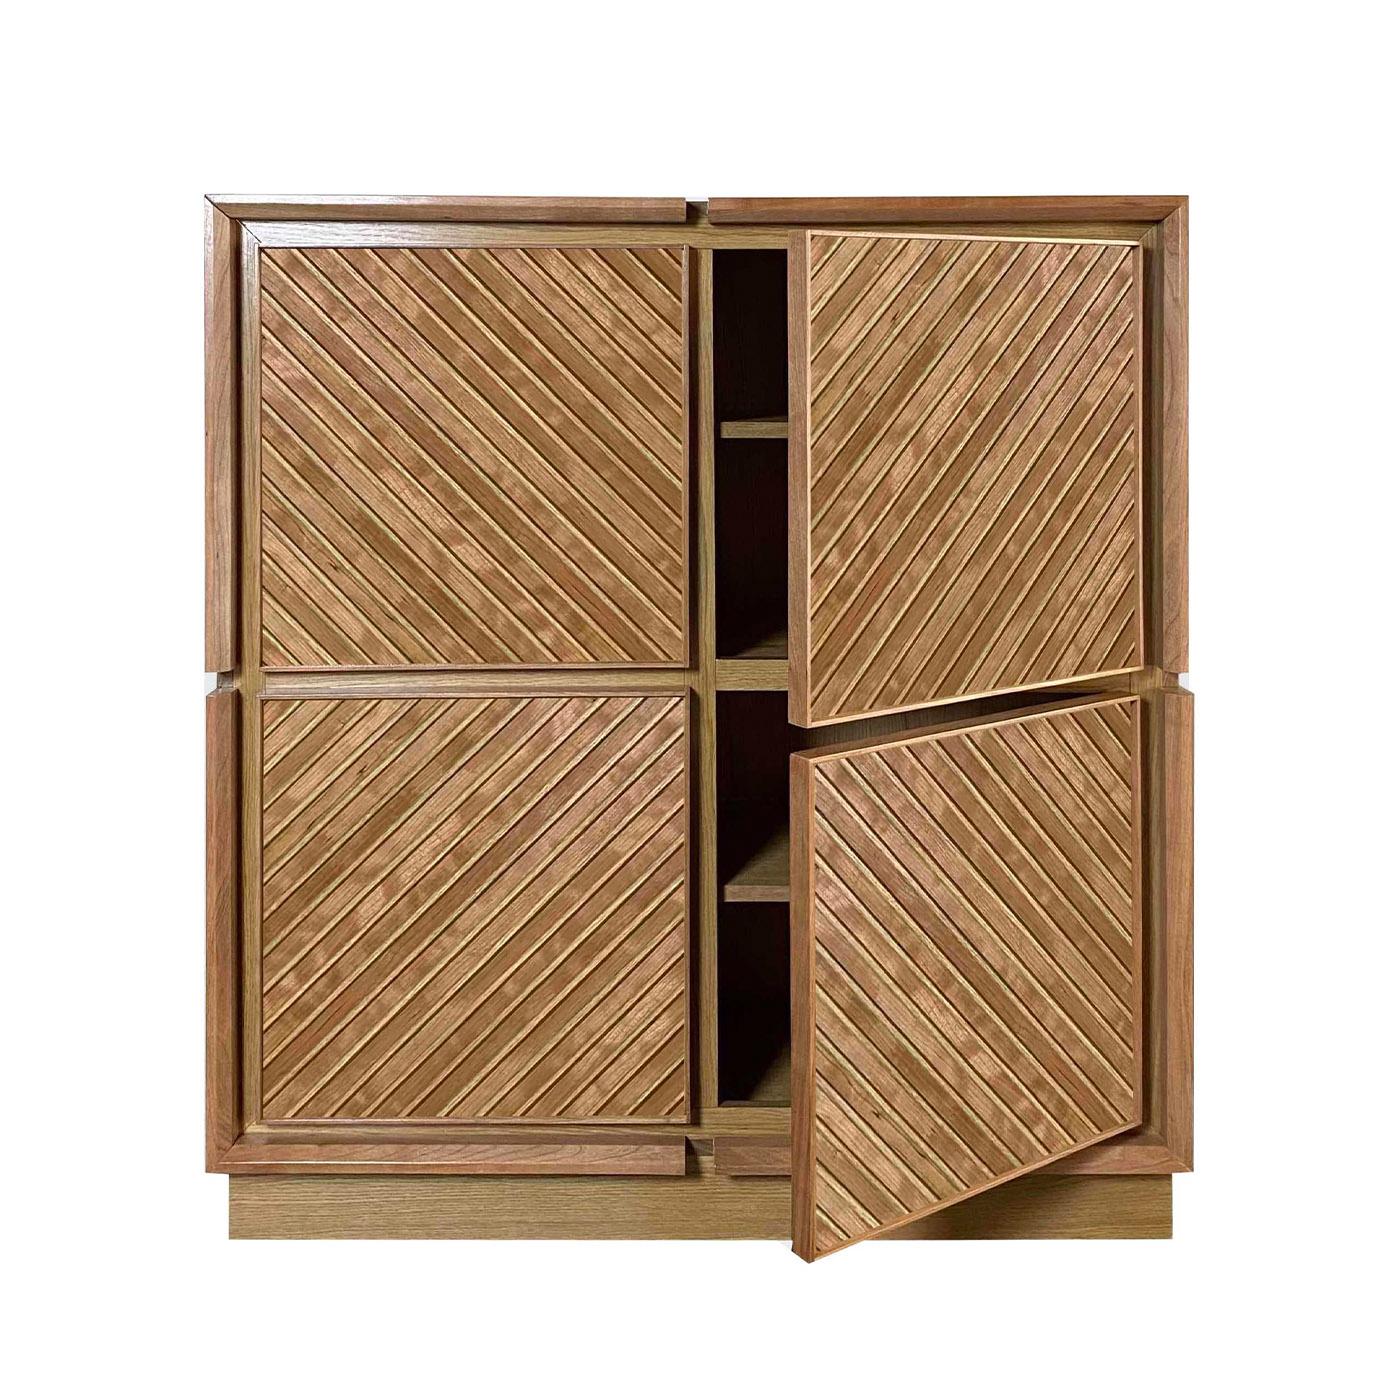 Square Line Sideboard #1 By Mascia Meccani In New Condition For Sale In Milan, IT